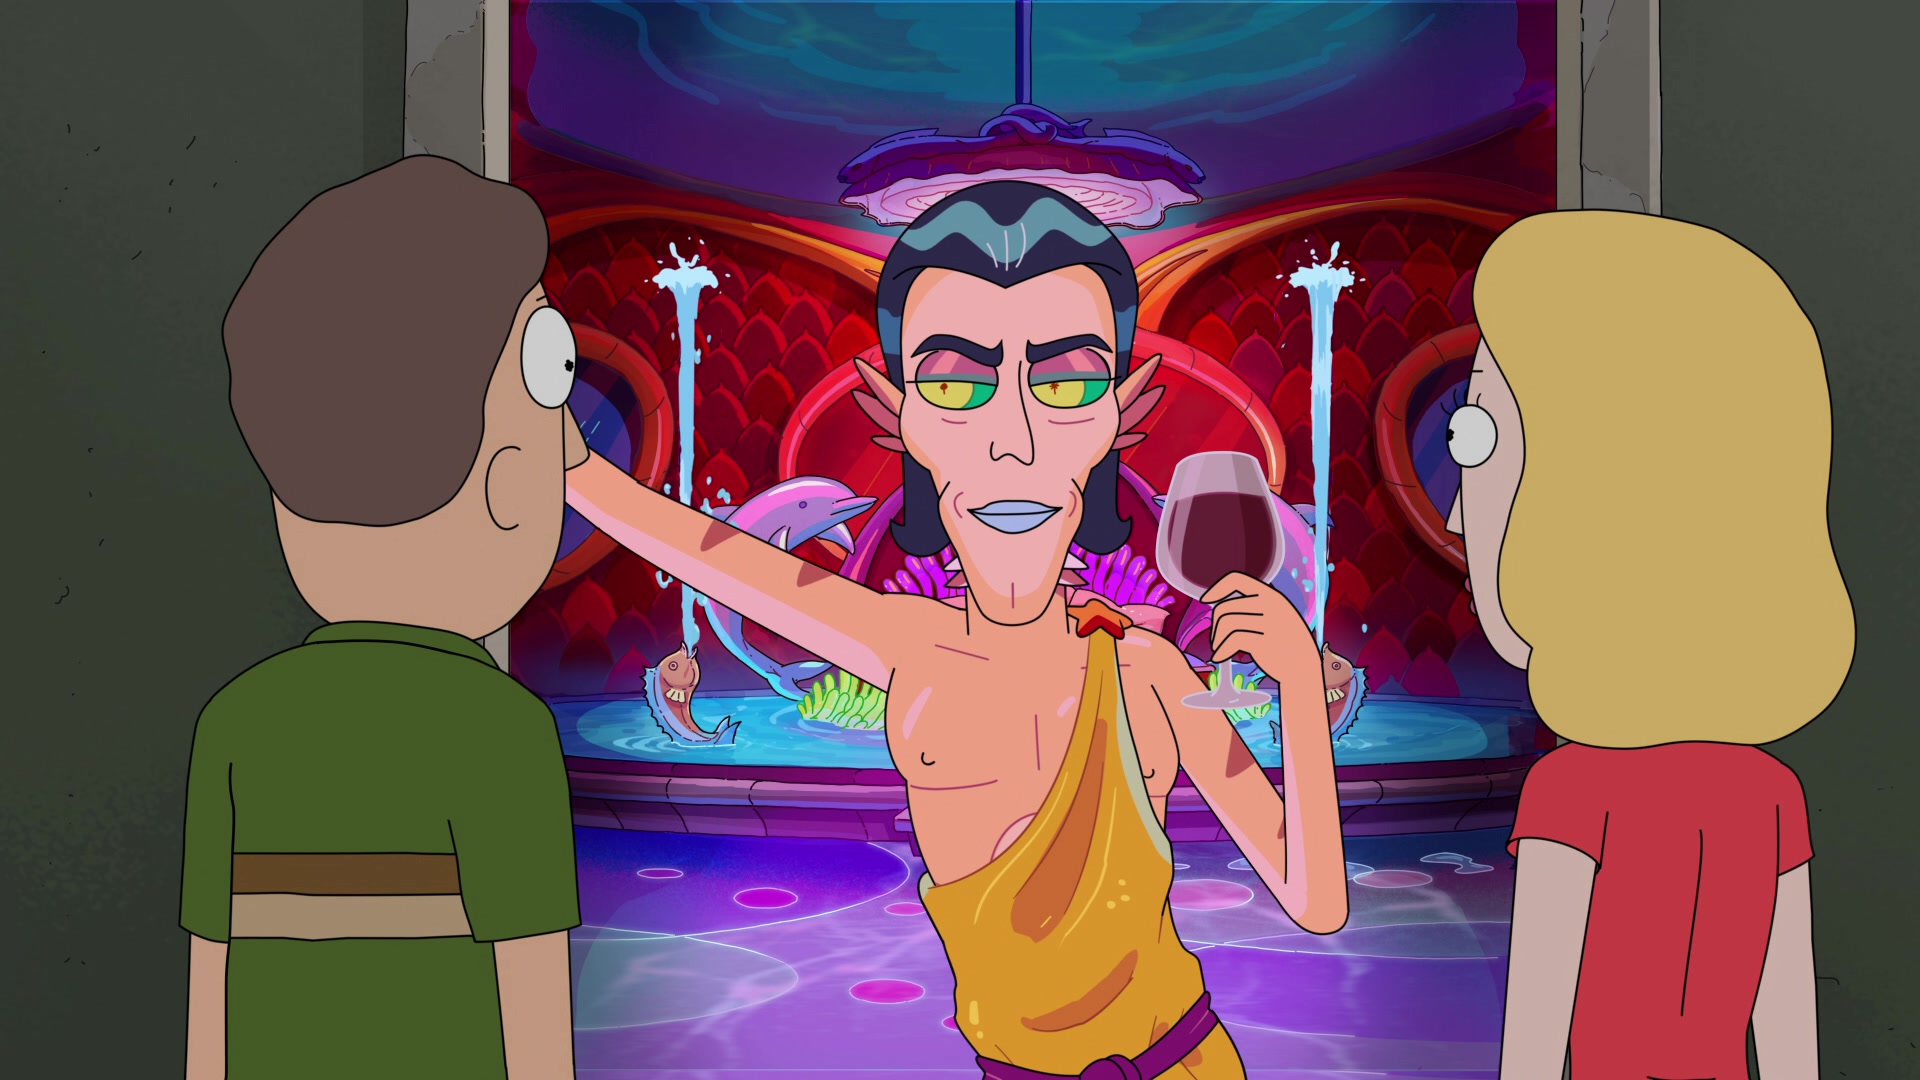 Jerry (Chris Parnell) and Beth (Sarah Chalke) prepare to take Mr. Nimbus (Dan Harmon) up on his offer in Rick and Morty Season 5 Episode 1 "Mort Dinner Rick Andre" (2021), Adult Swim